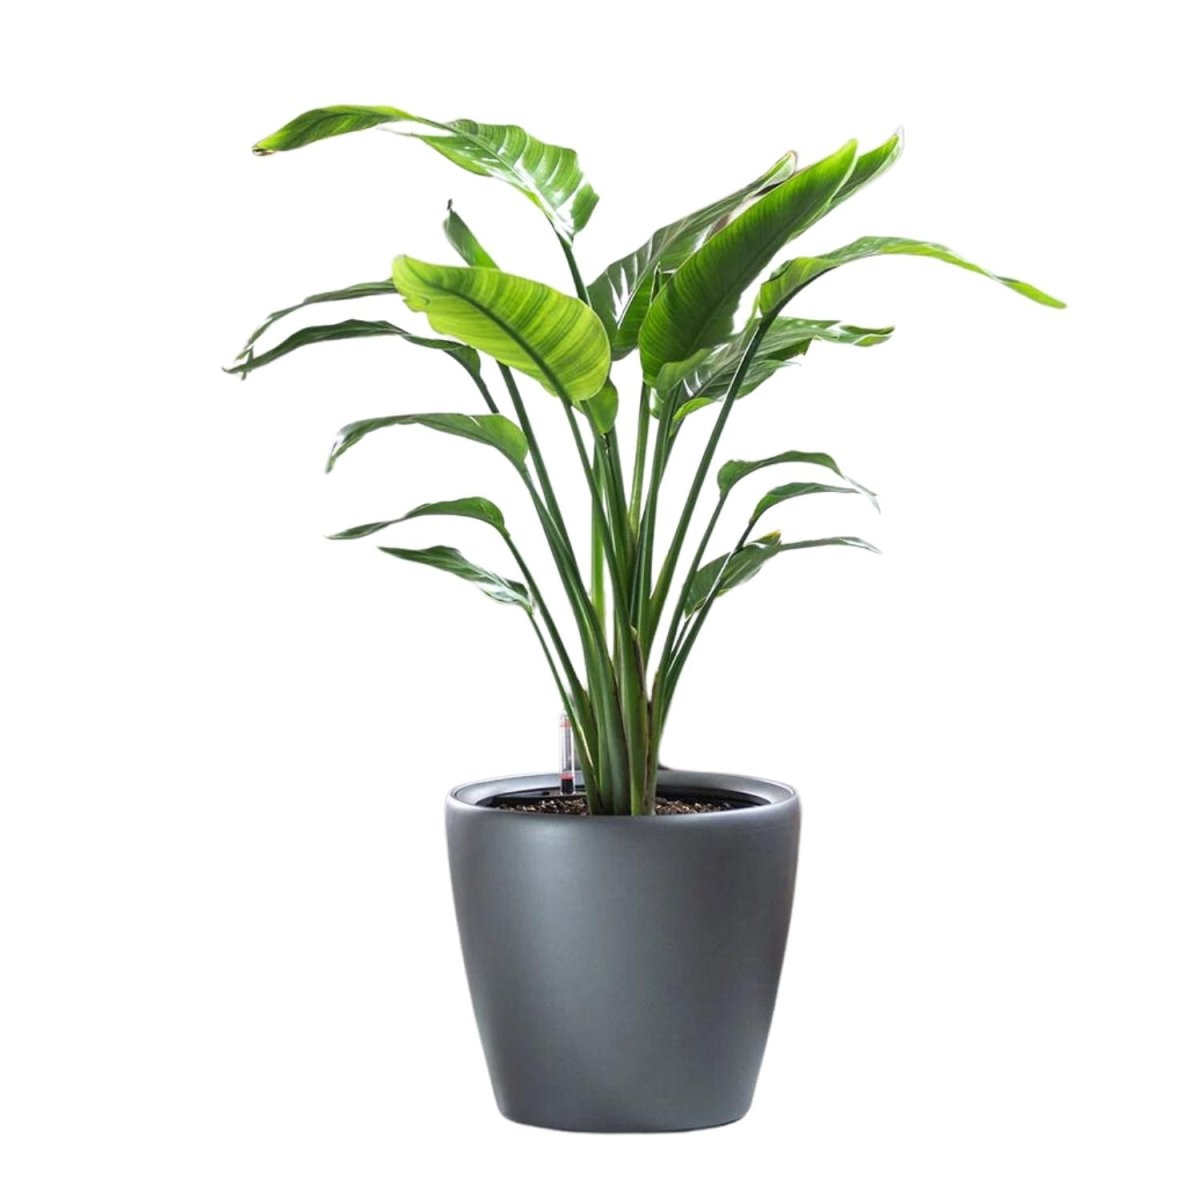 Bird of Paradise Plant Potted In Lechuza Classico Planter - Charcoal Metallic - My City Plants